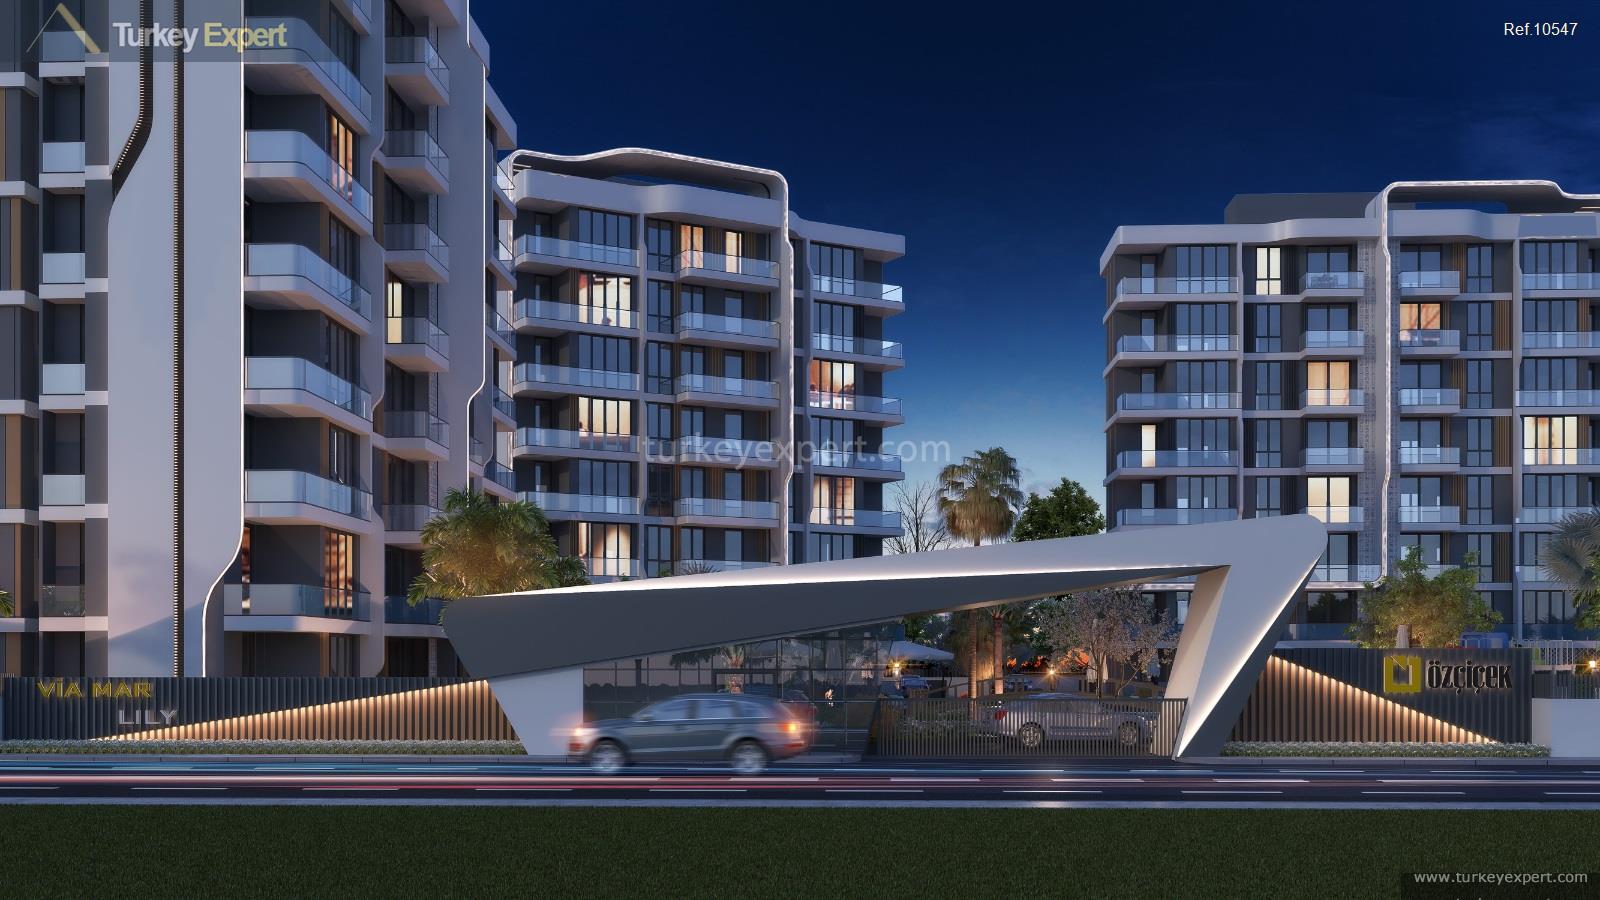 01modern apartments in a complex in antalya altinbas with various11